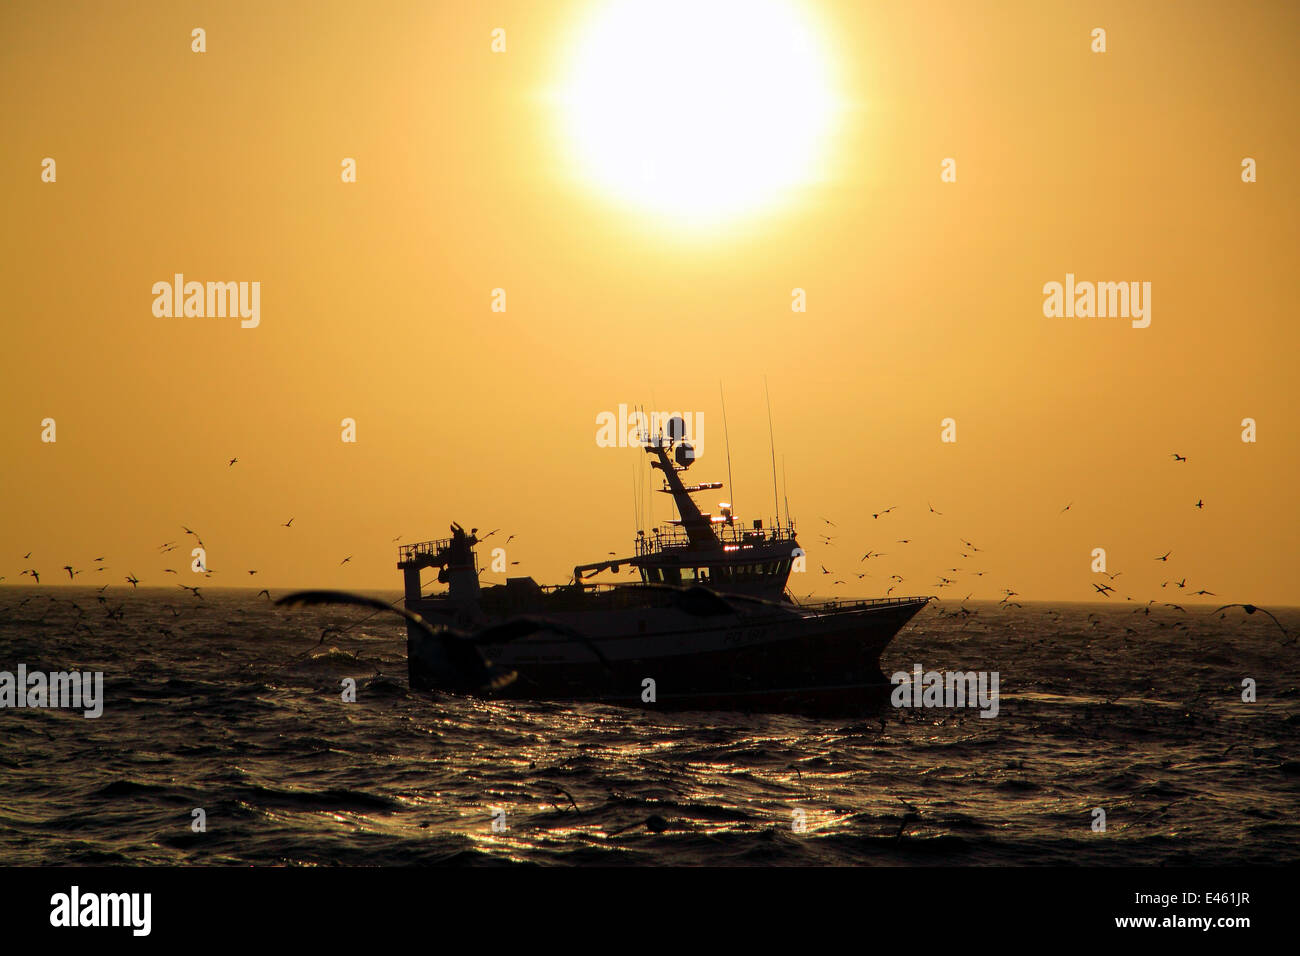 Trawling on the 'Ocean Harvest' at sunset on the North Sea, Europe, March 2011. Property released. Stock Photo